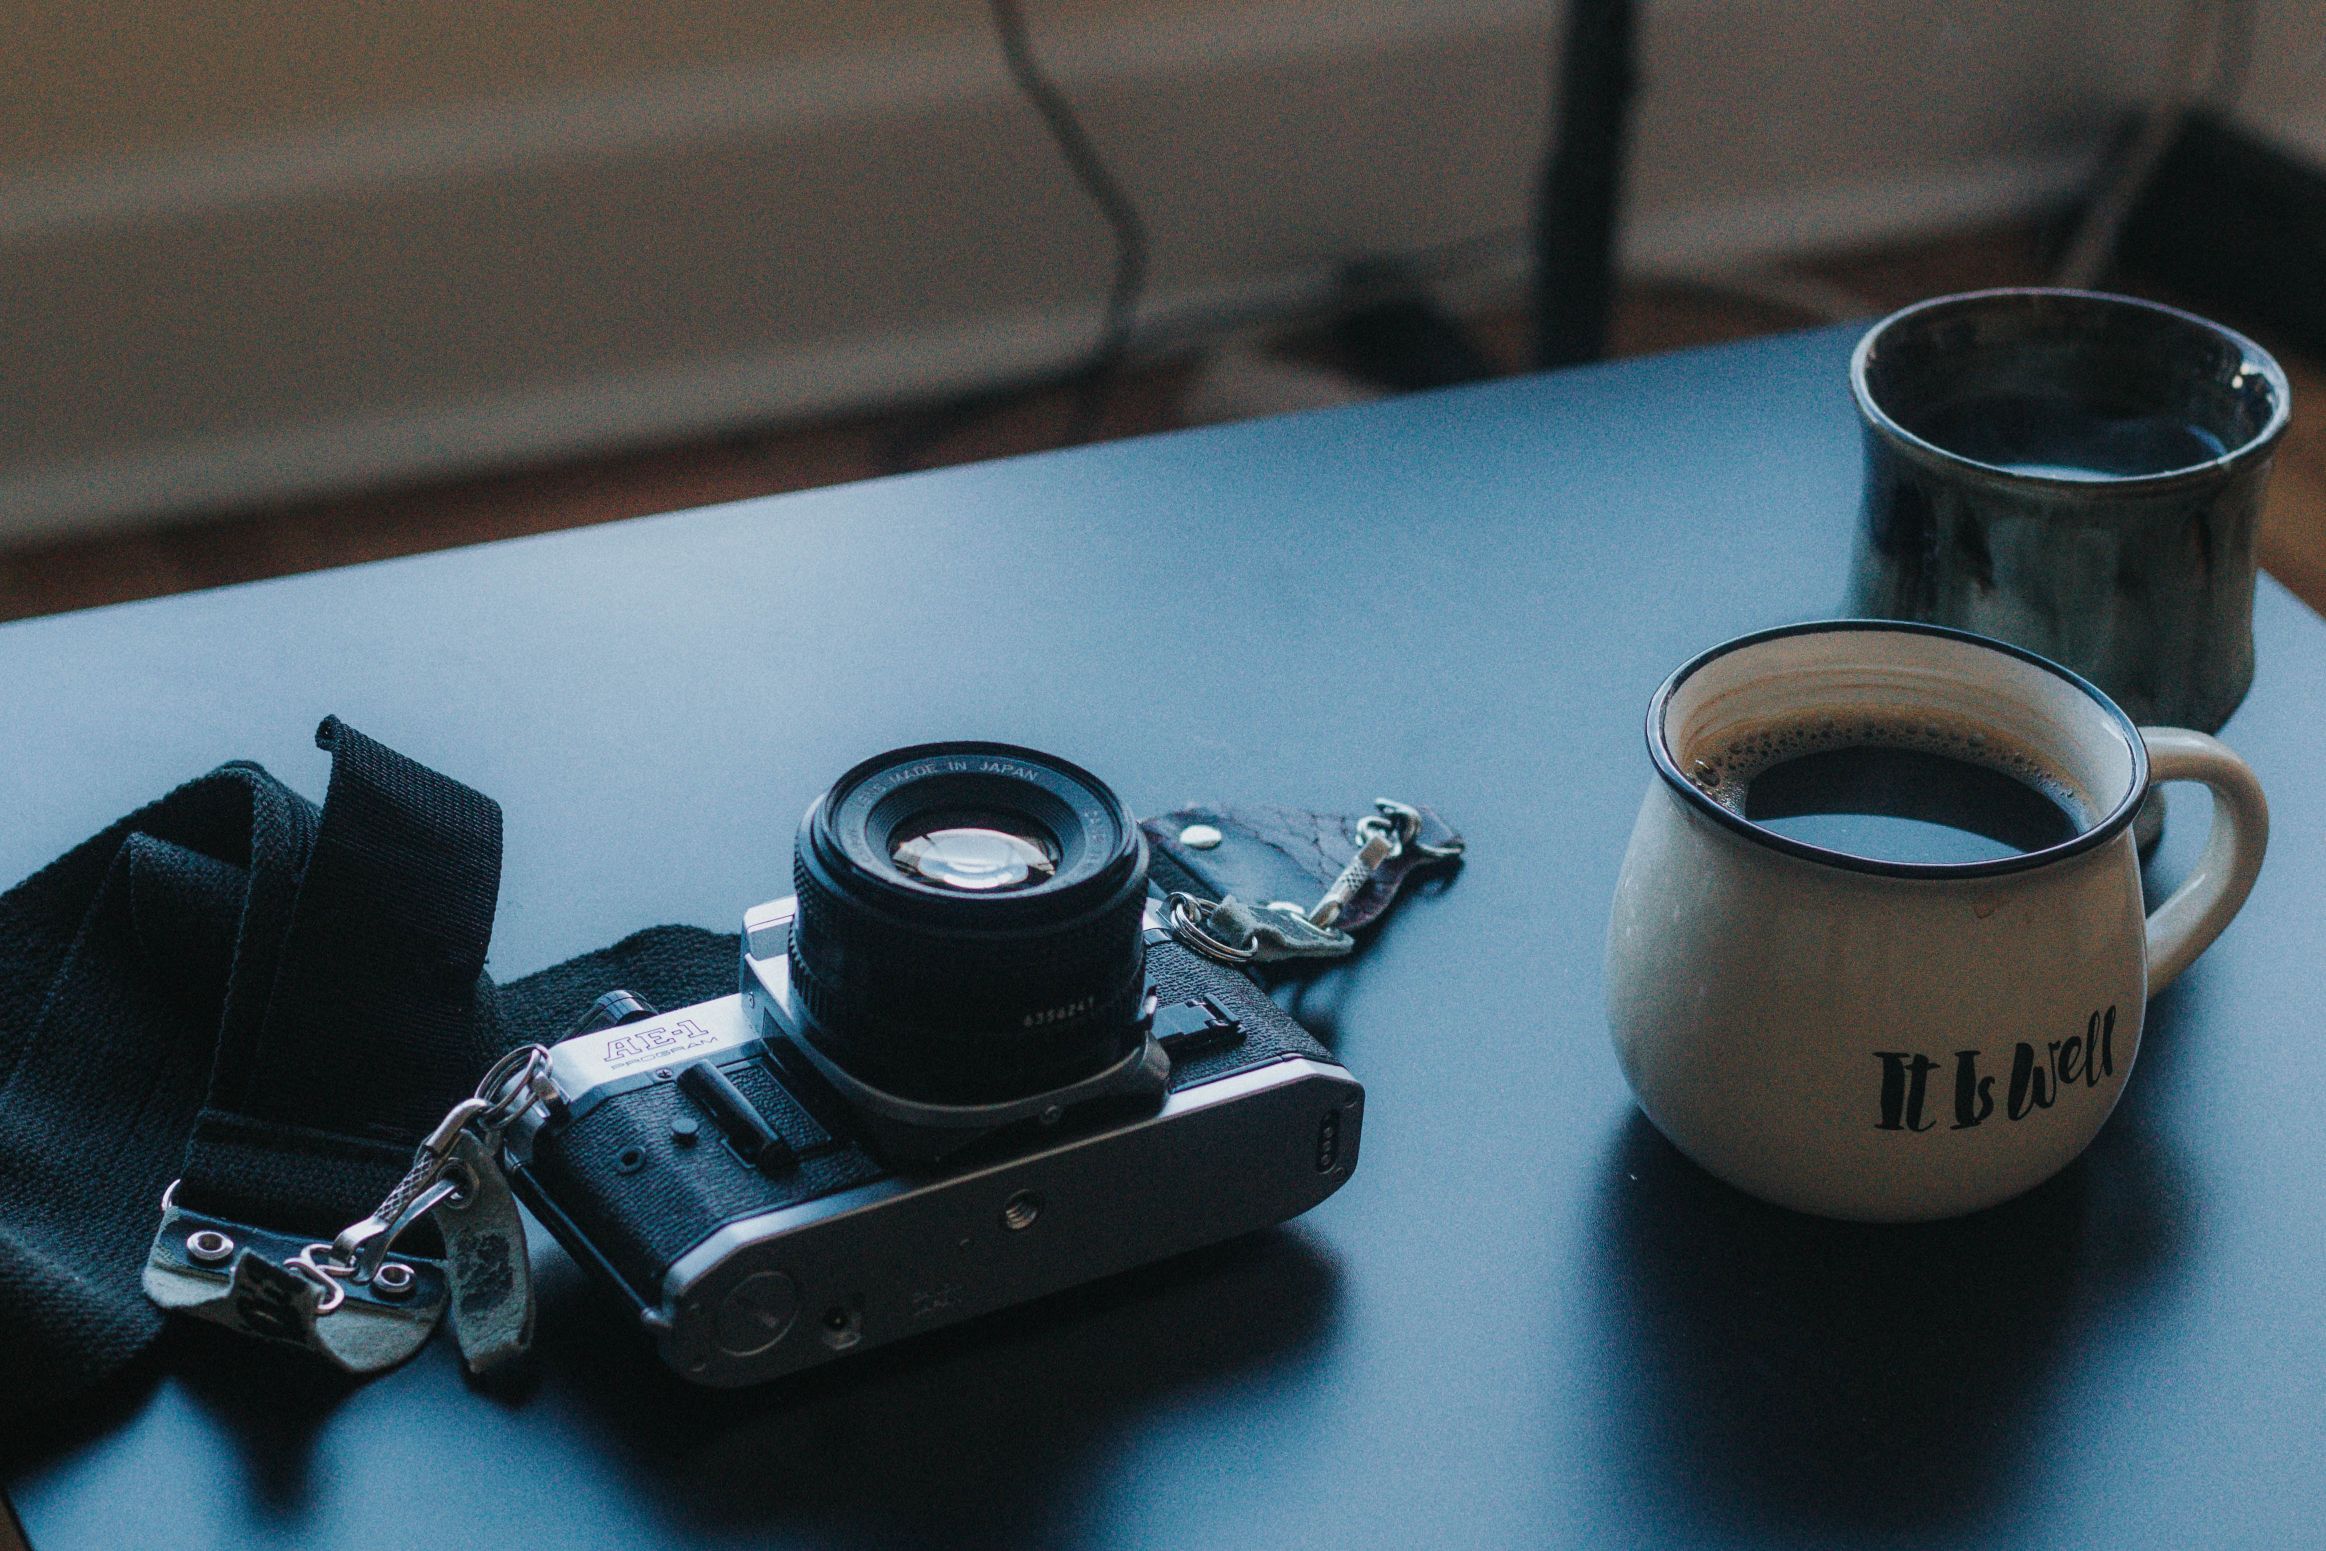 A film camera and a cup of black coffee on a table.